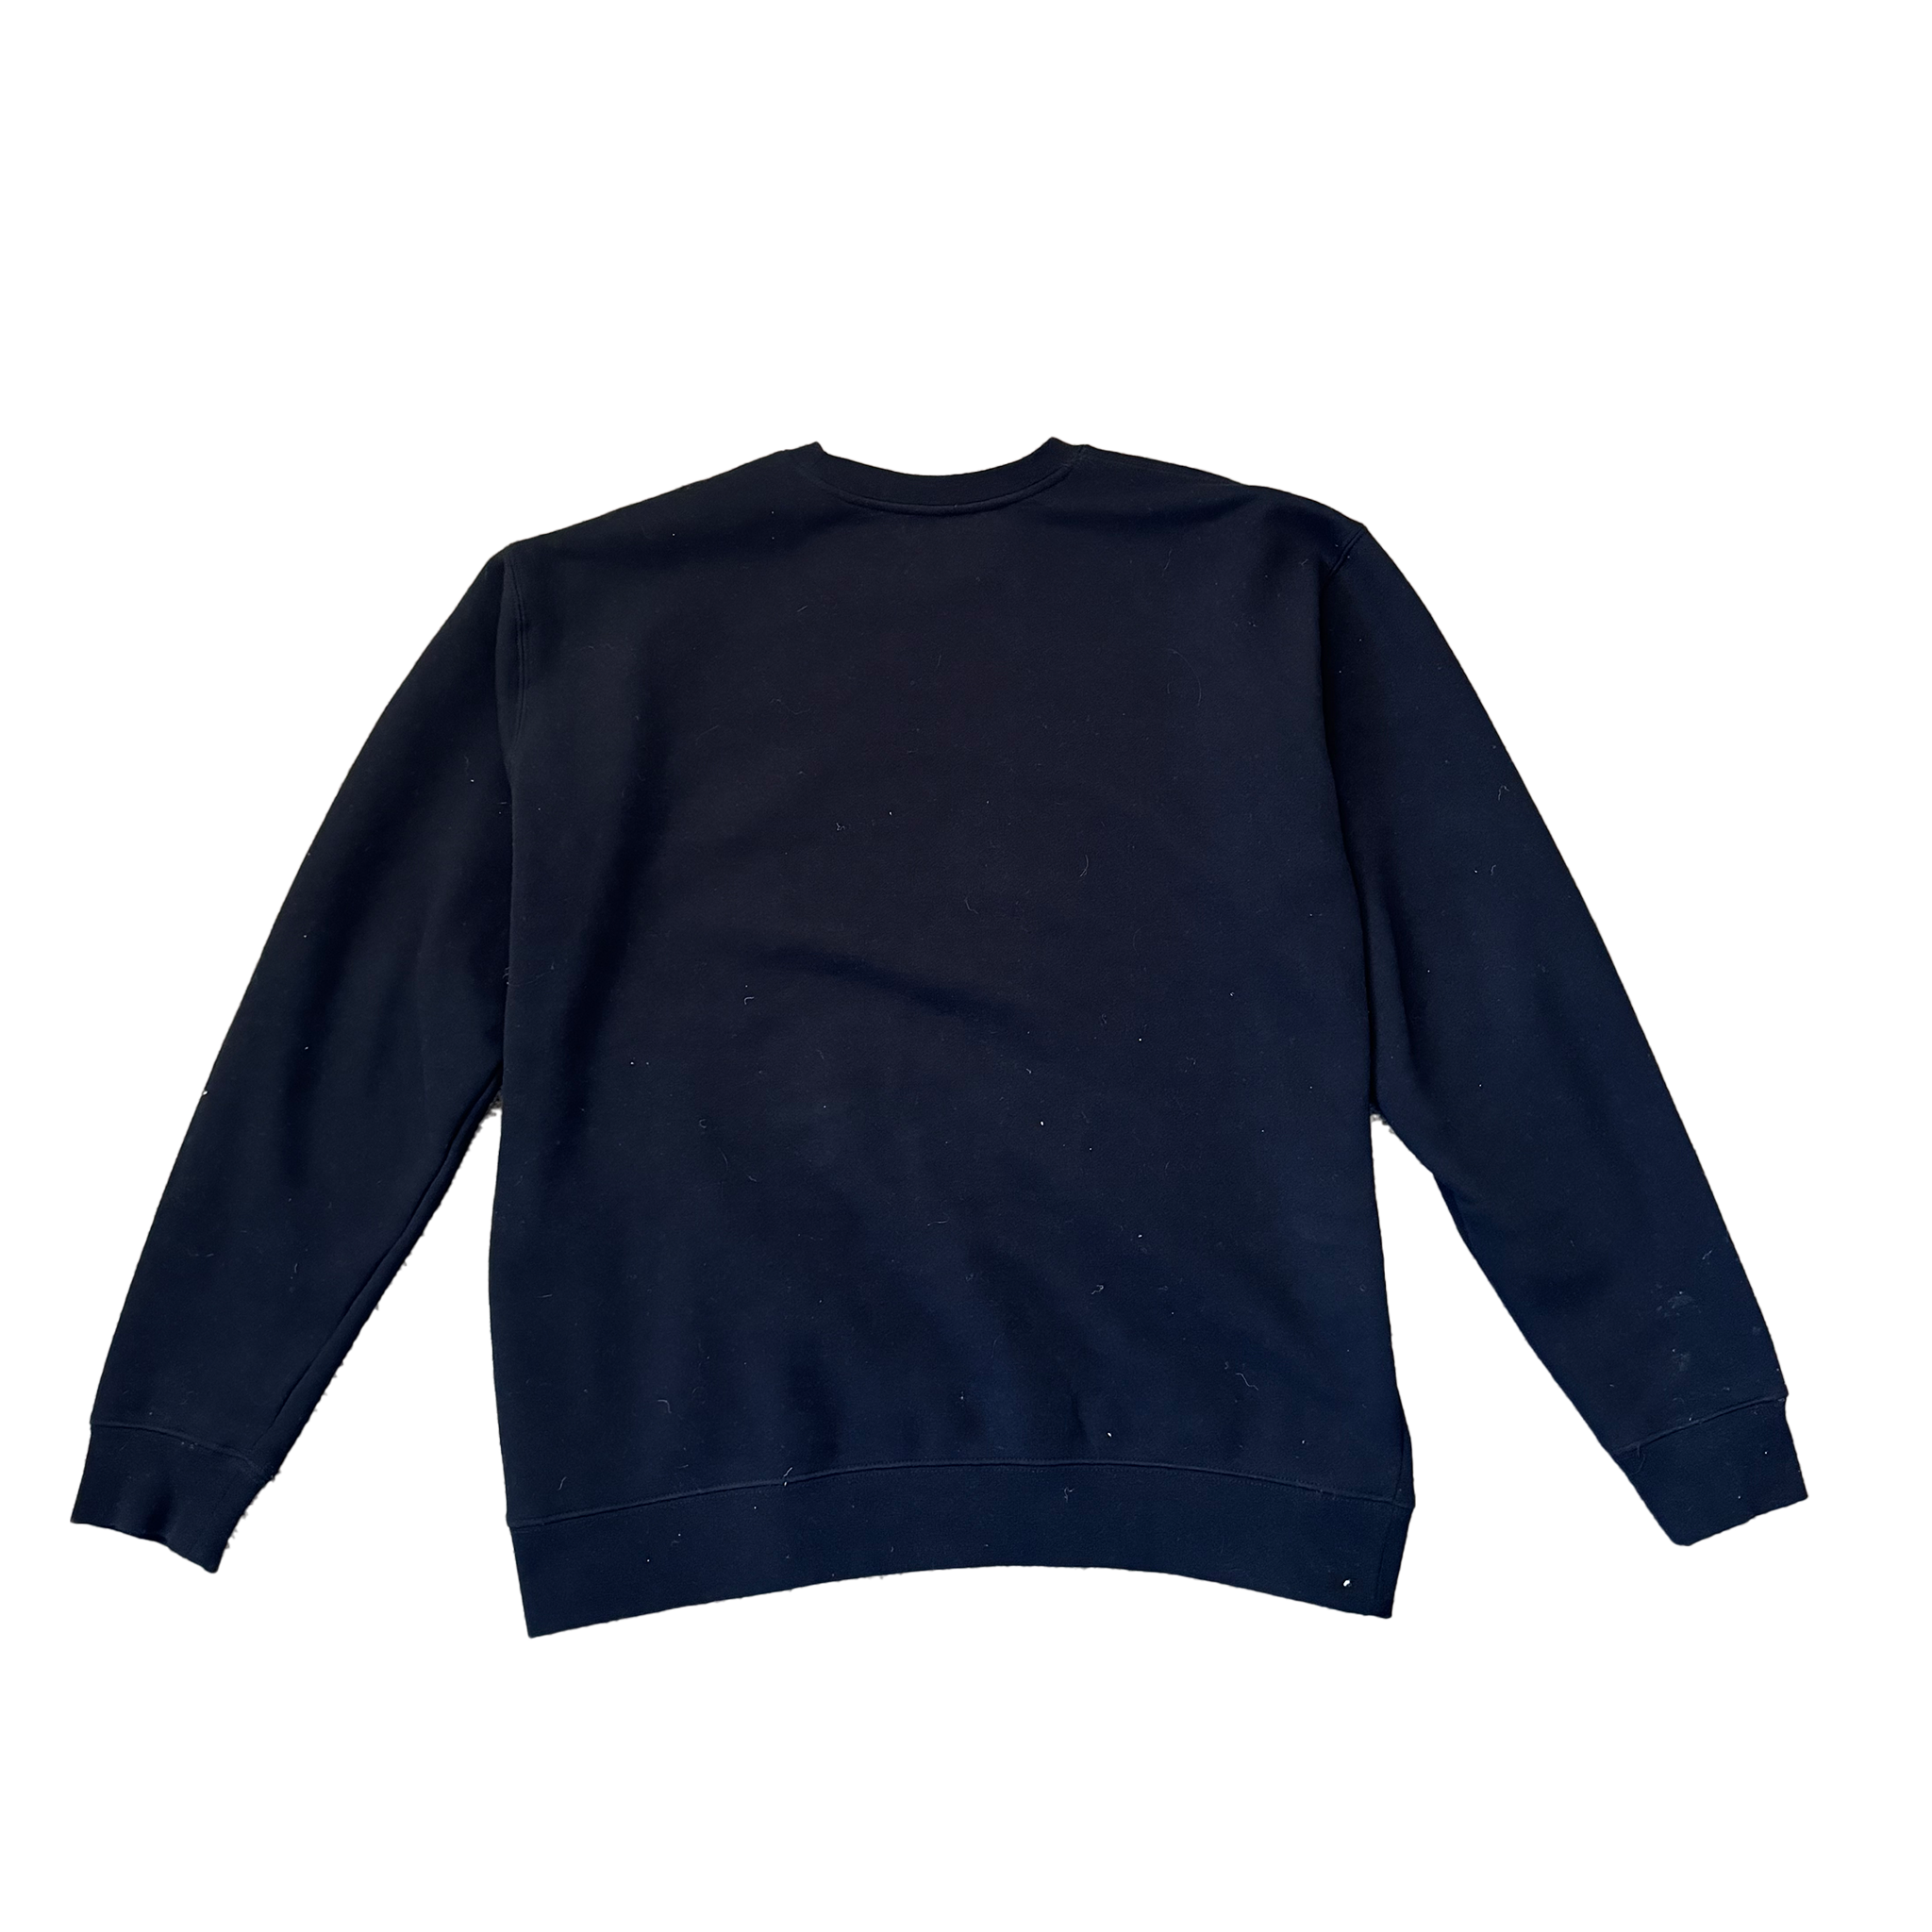 Staple Crew in navy blue made from premium ring-spun cotton, laid flat on a beige carpet background by Better not.